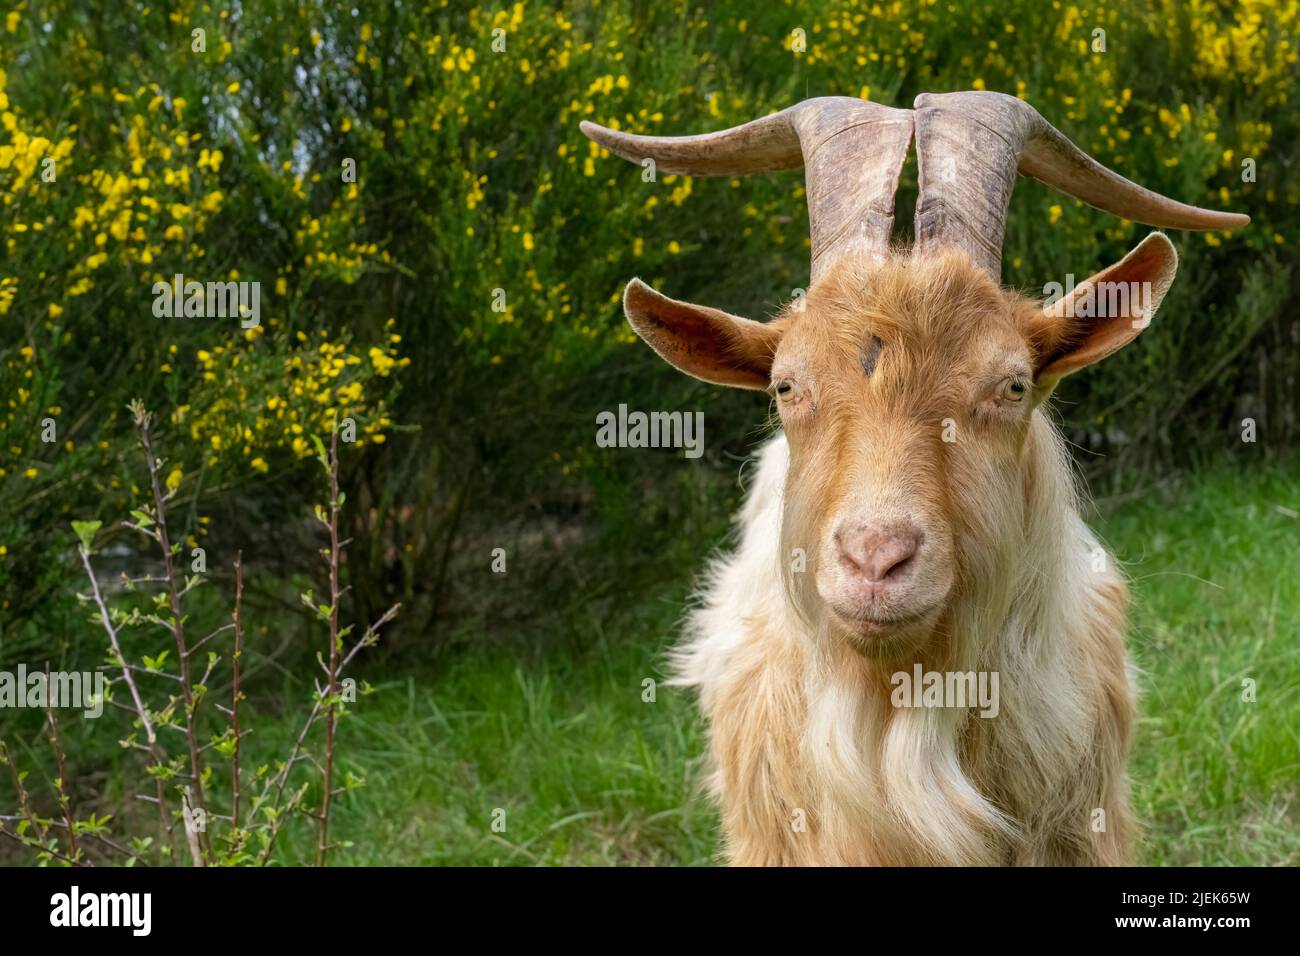 Issaquah, Washington, USA.  Close-up portrait of a rare heritage breed, Golden Gurnsey billy goat with long horns, with a Scotch Broom shrub in the ba Stock Photo